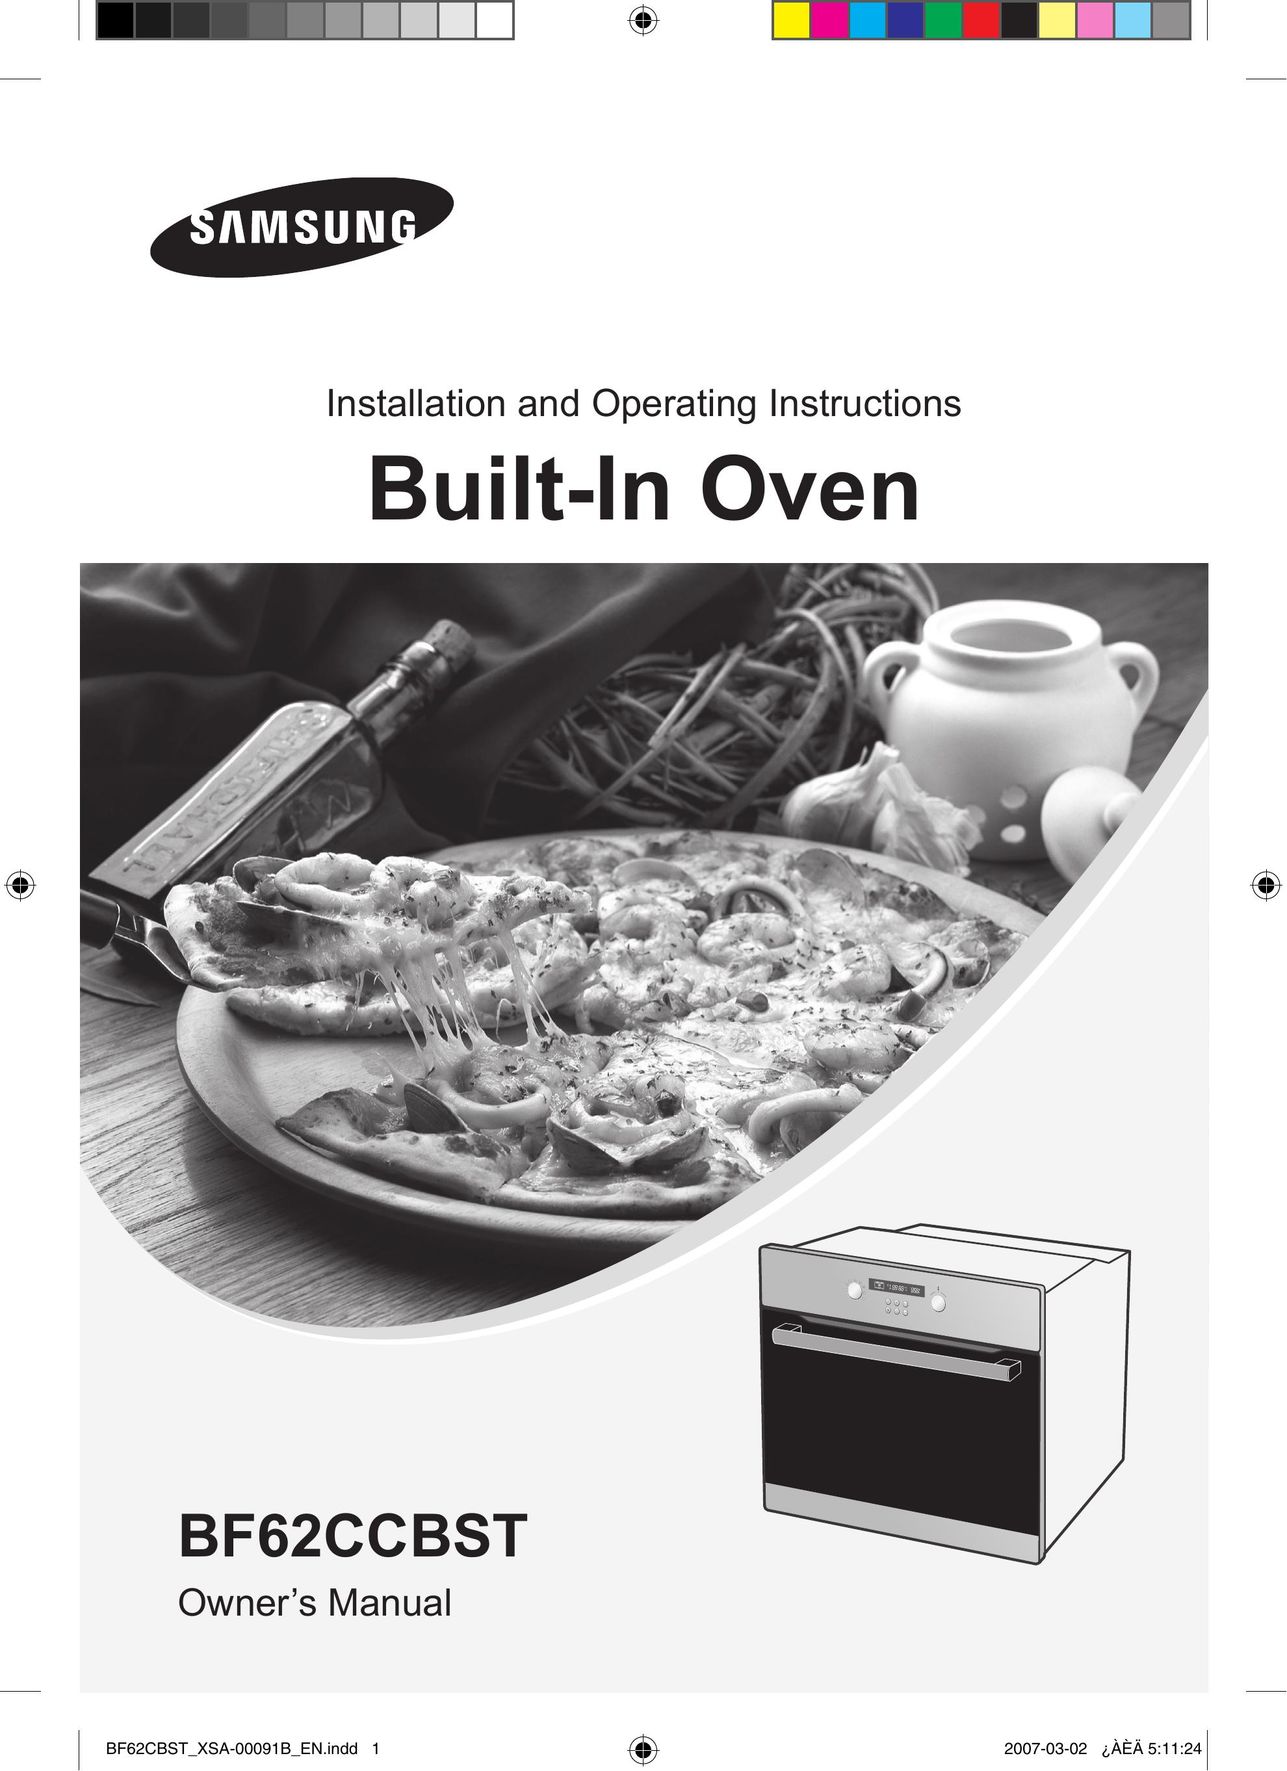 Samsung BF62CCBST Oven User Manual